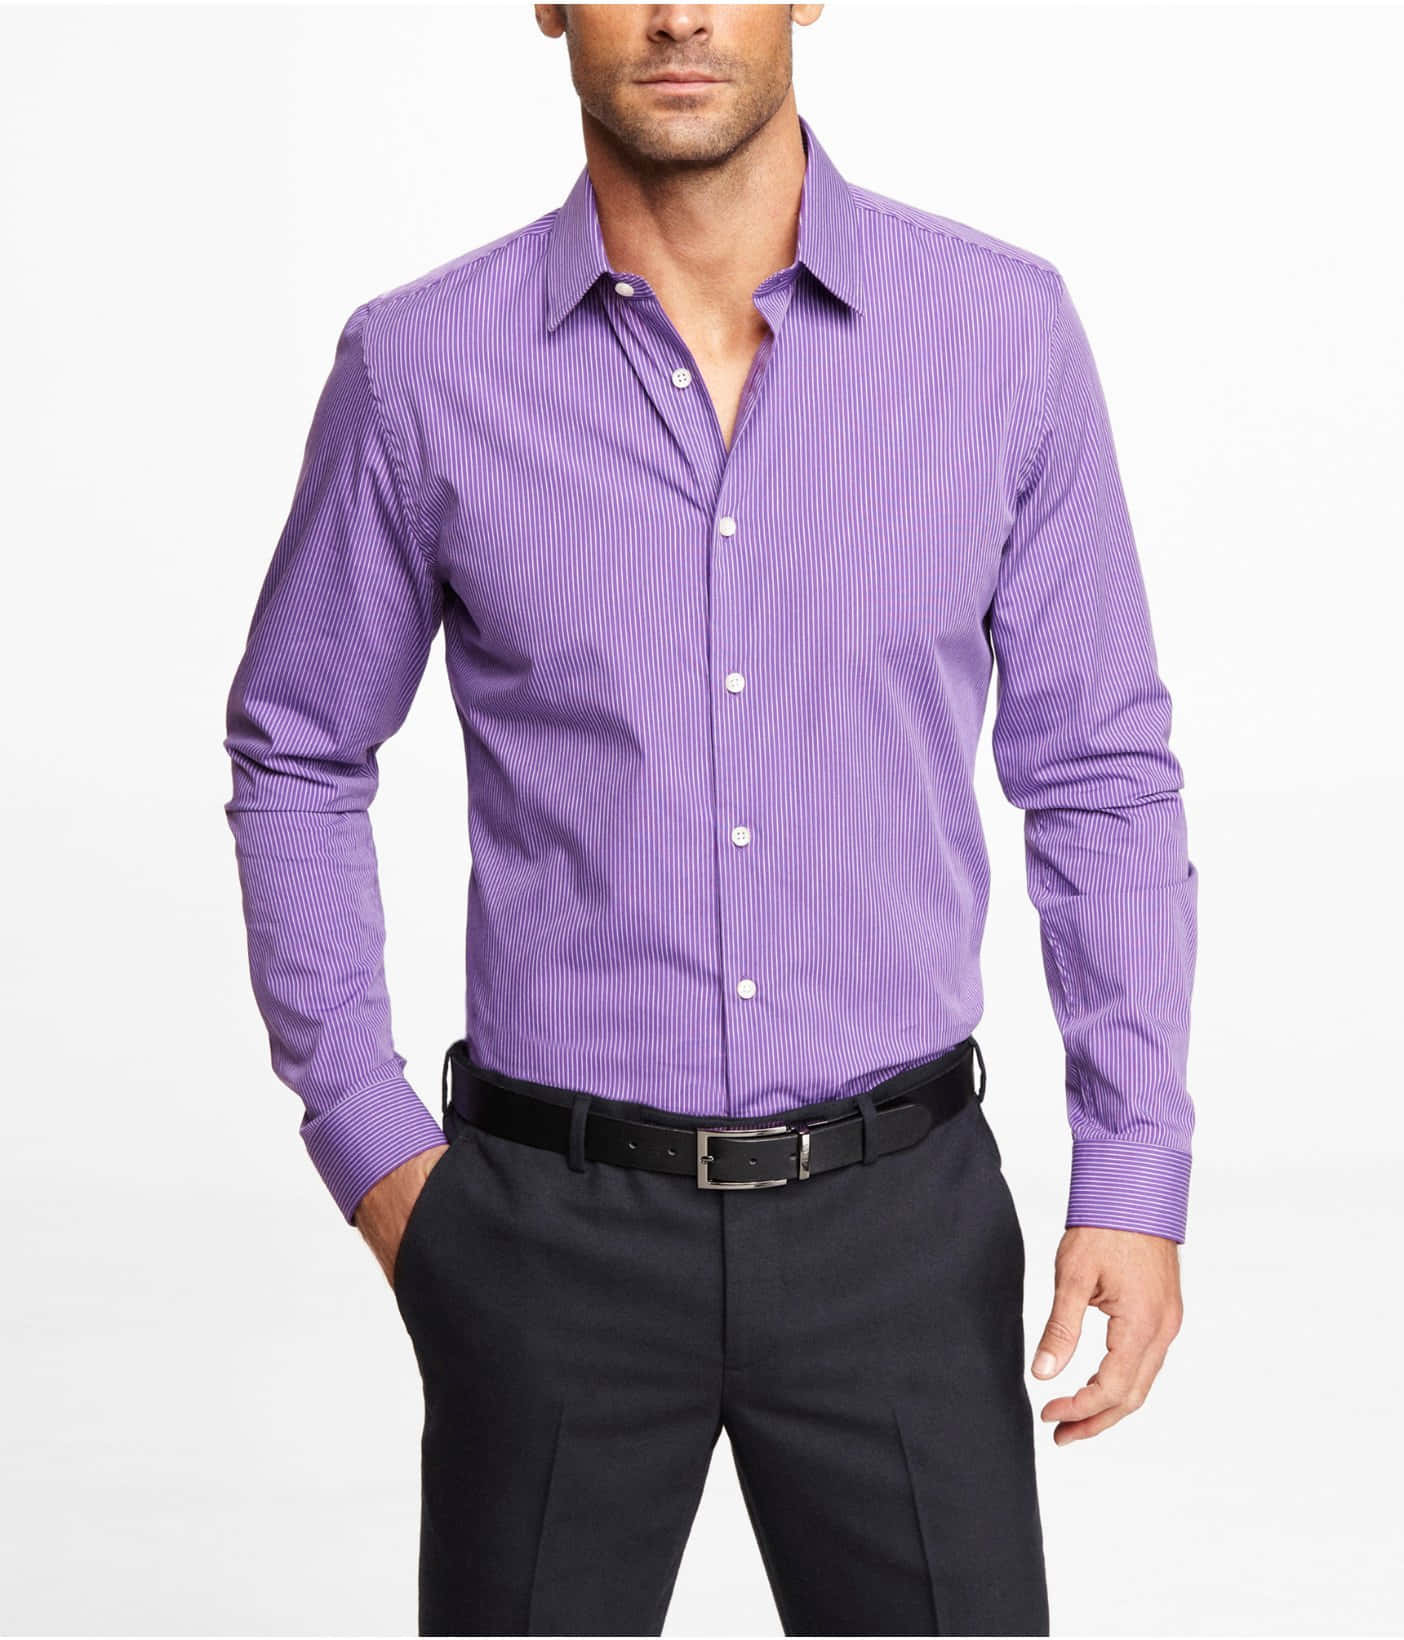 Look fashion-forward and stand out in a stylish purple shirt. Wallpaper